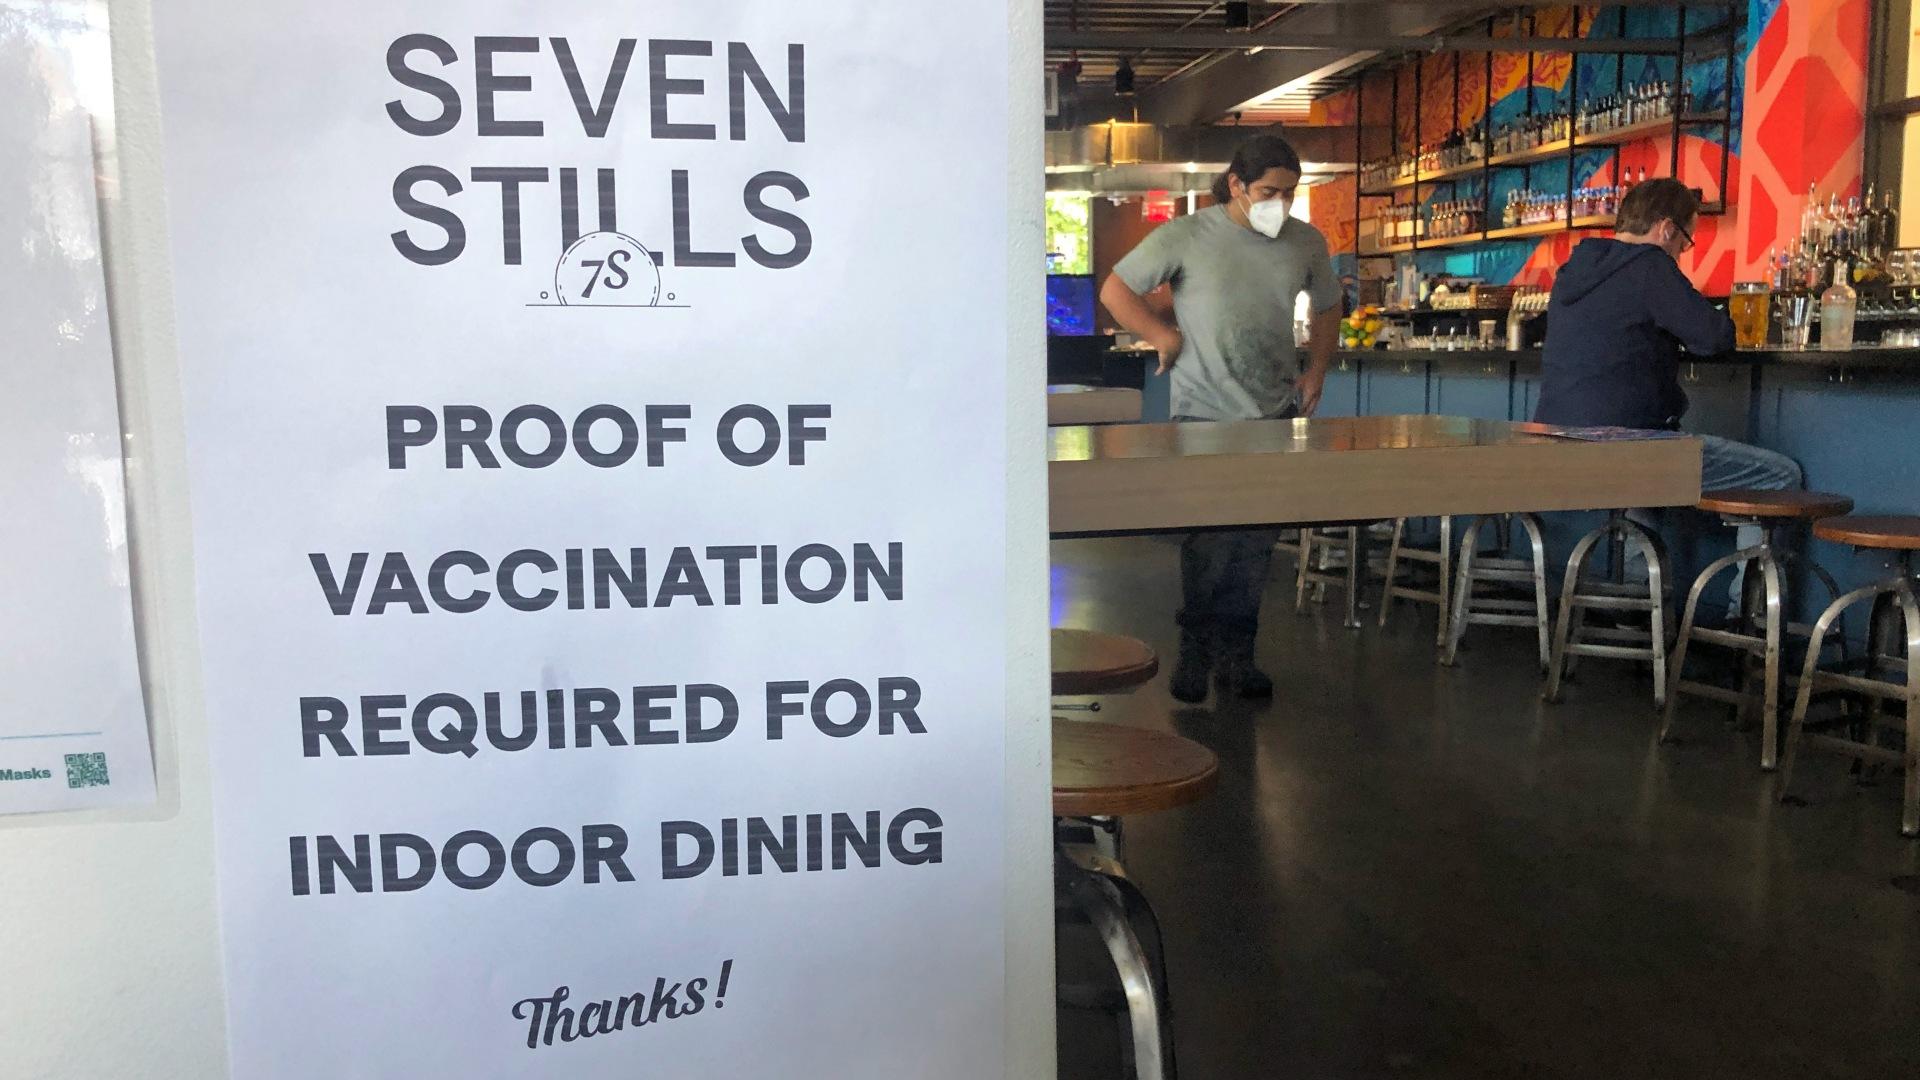 A proof of vaccination sign is posted at a bar in San Francisco on Thursday, July 29, 2021. (AP Photo / Haven Daley)